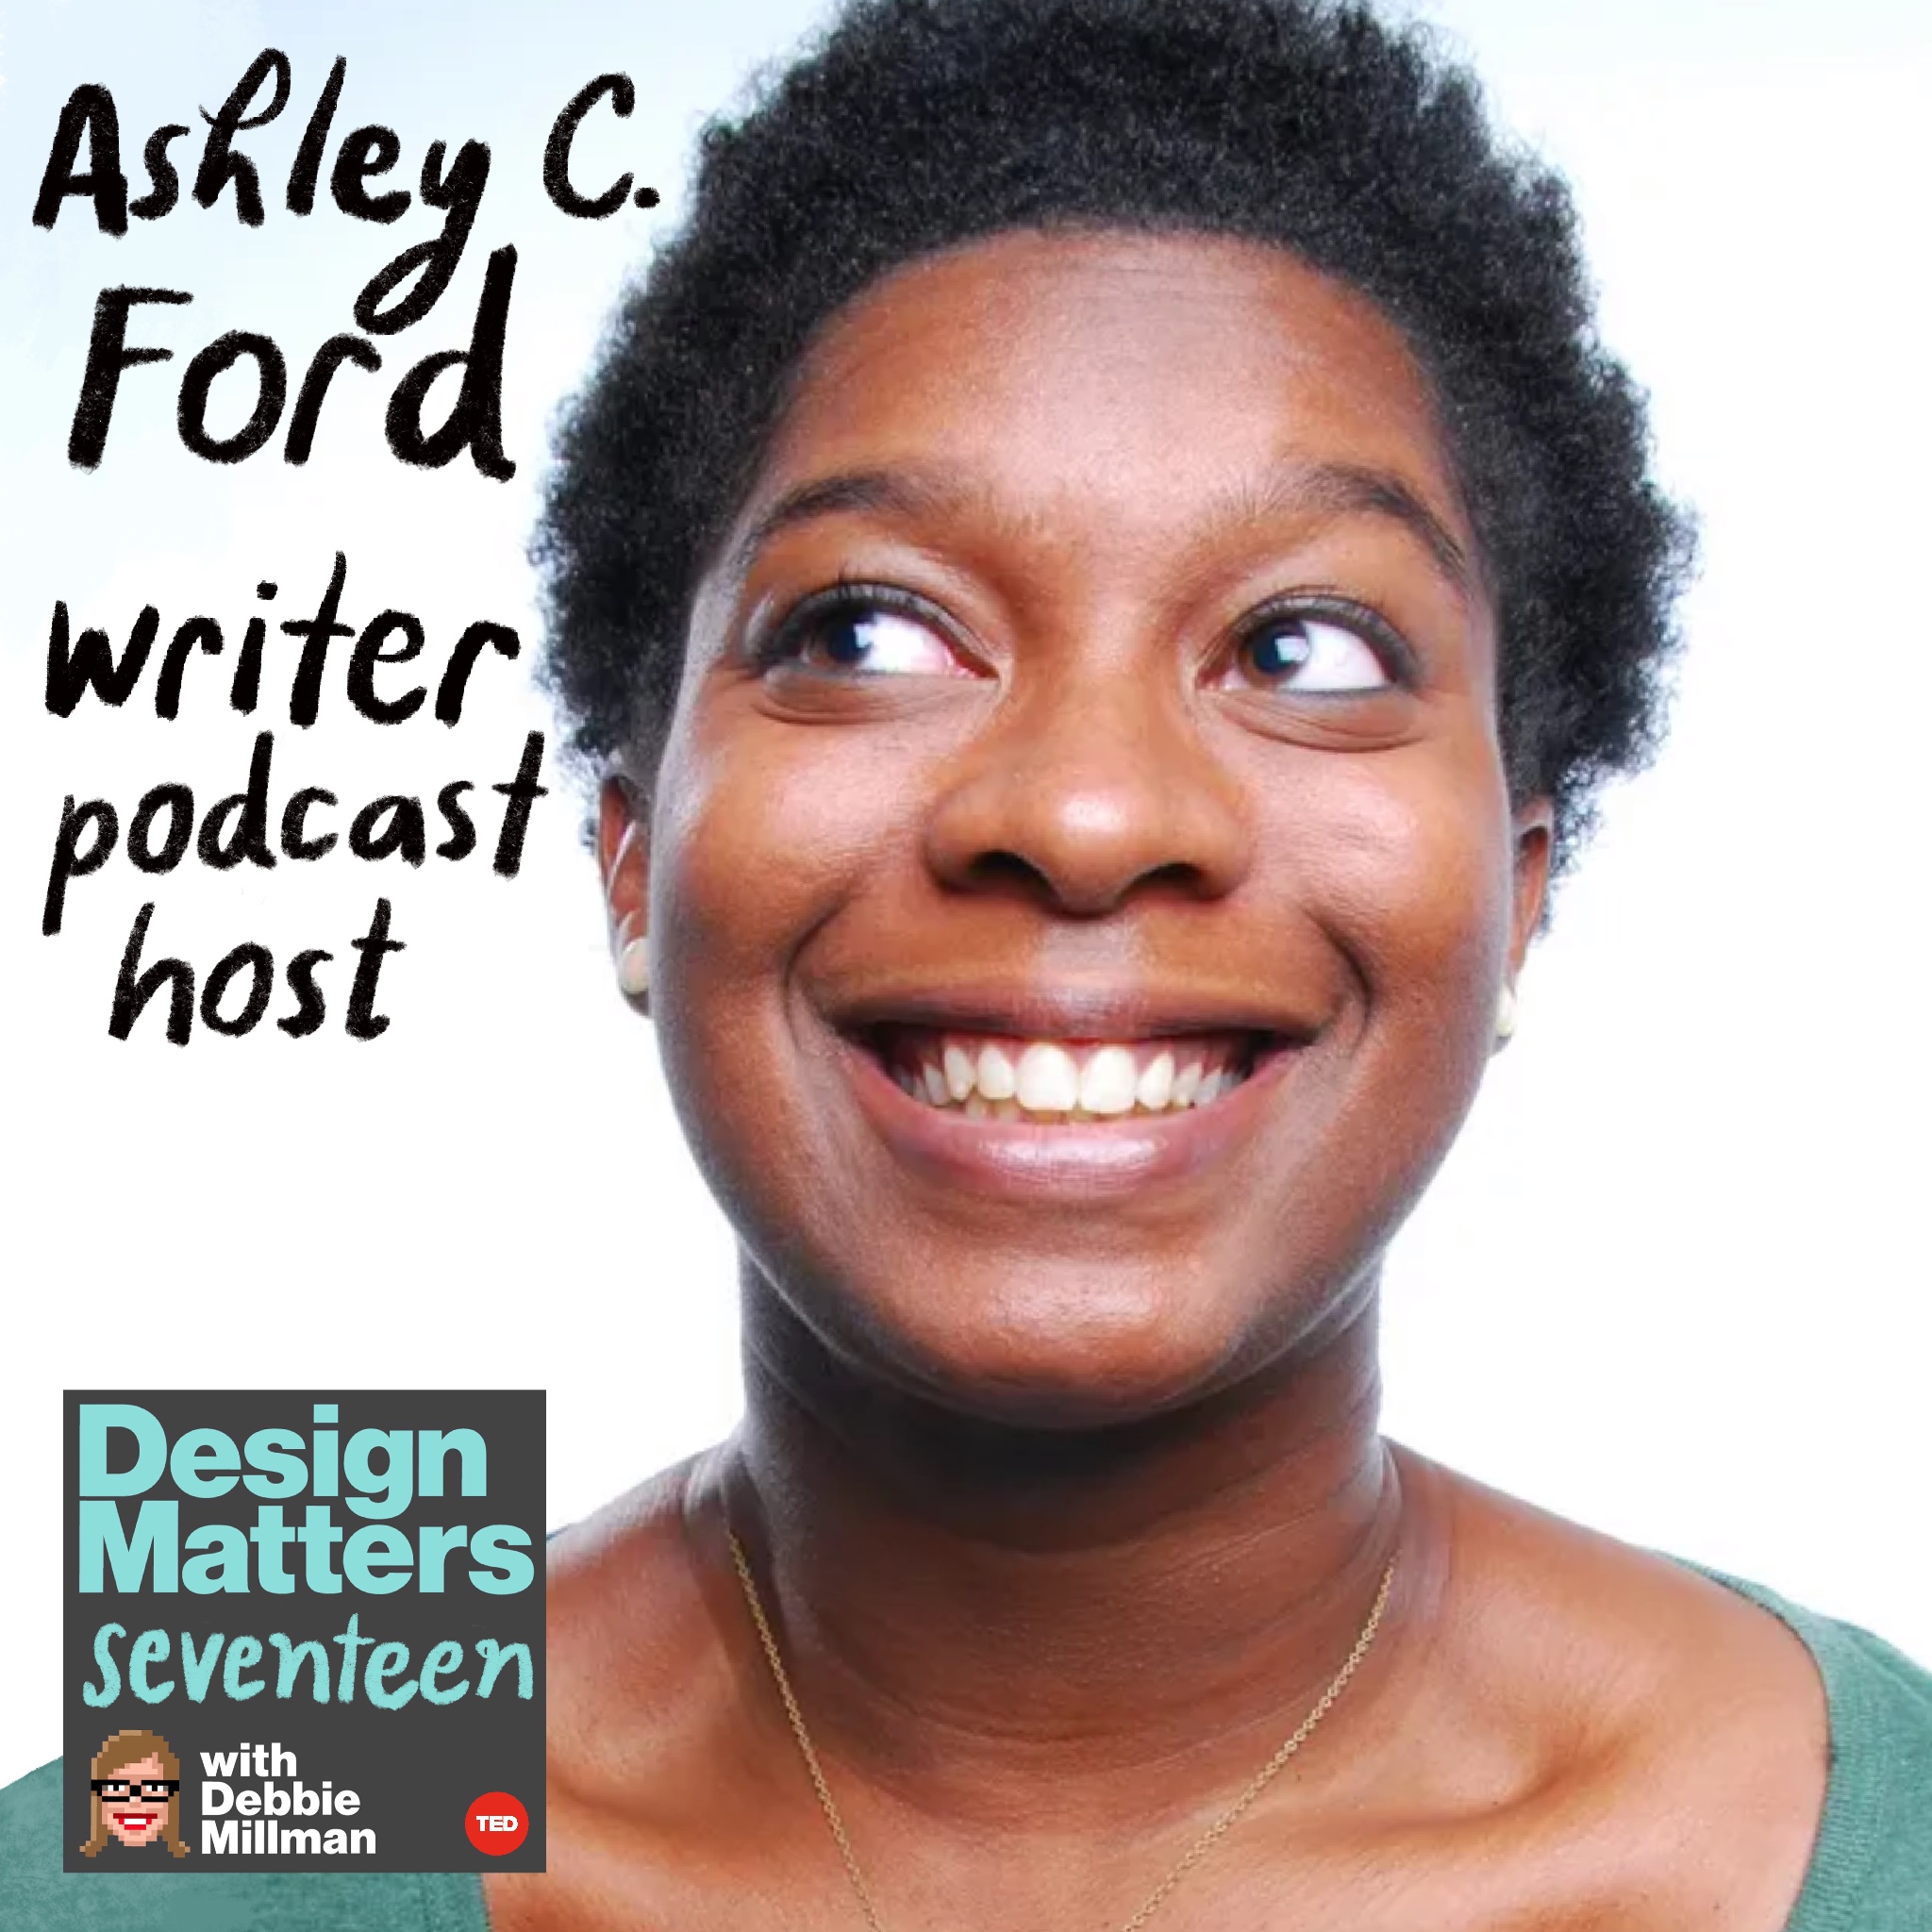 Thumbnail for "Ashley C. Ford ".